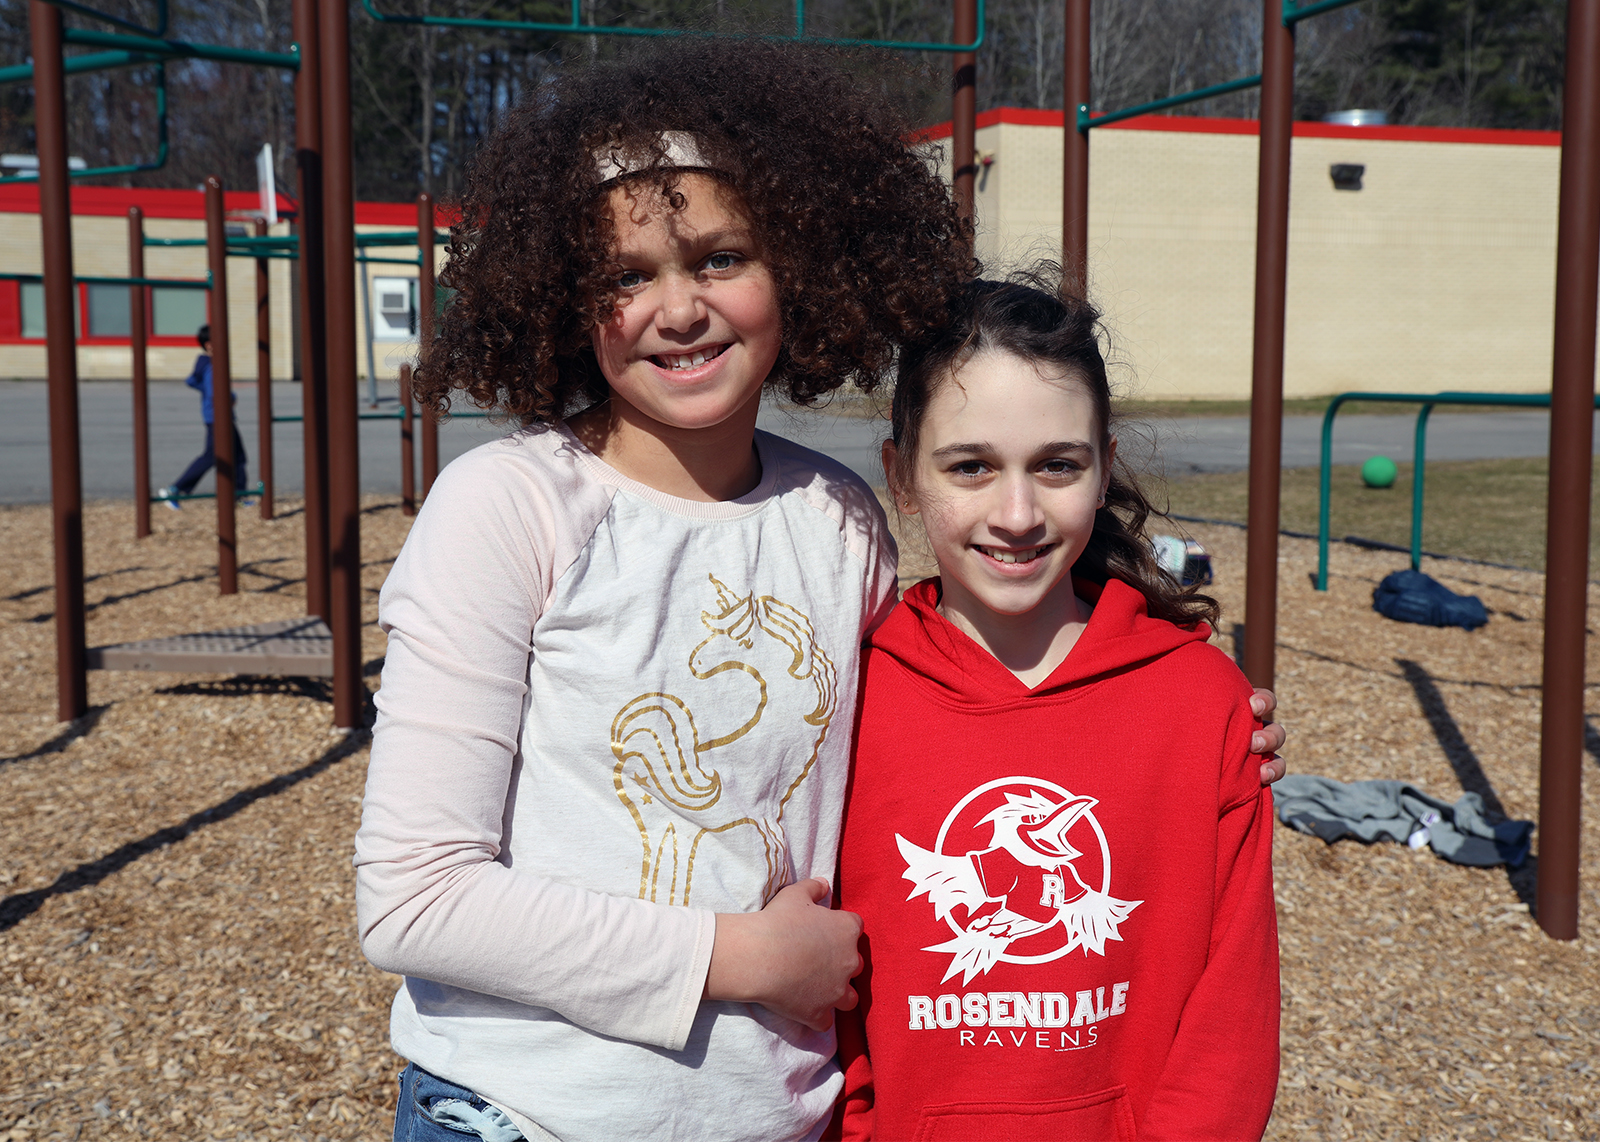 students smiling on the playground